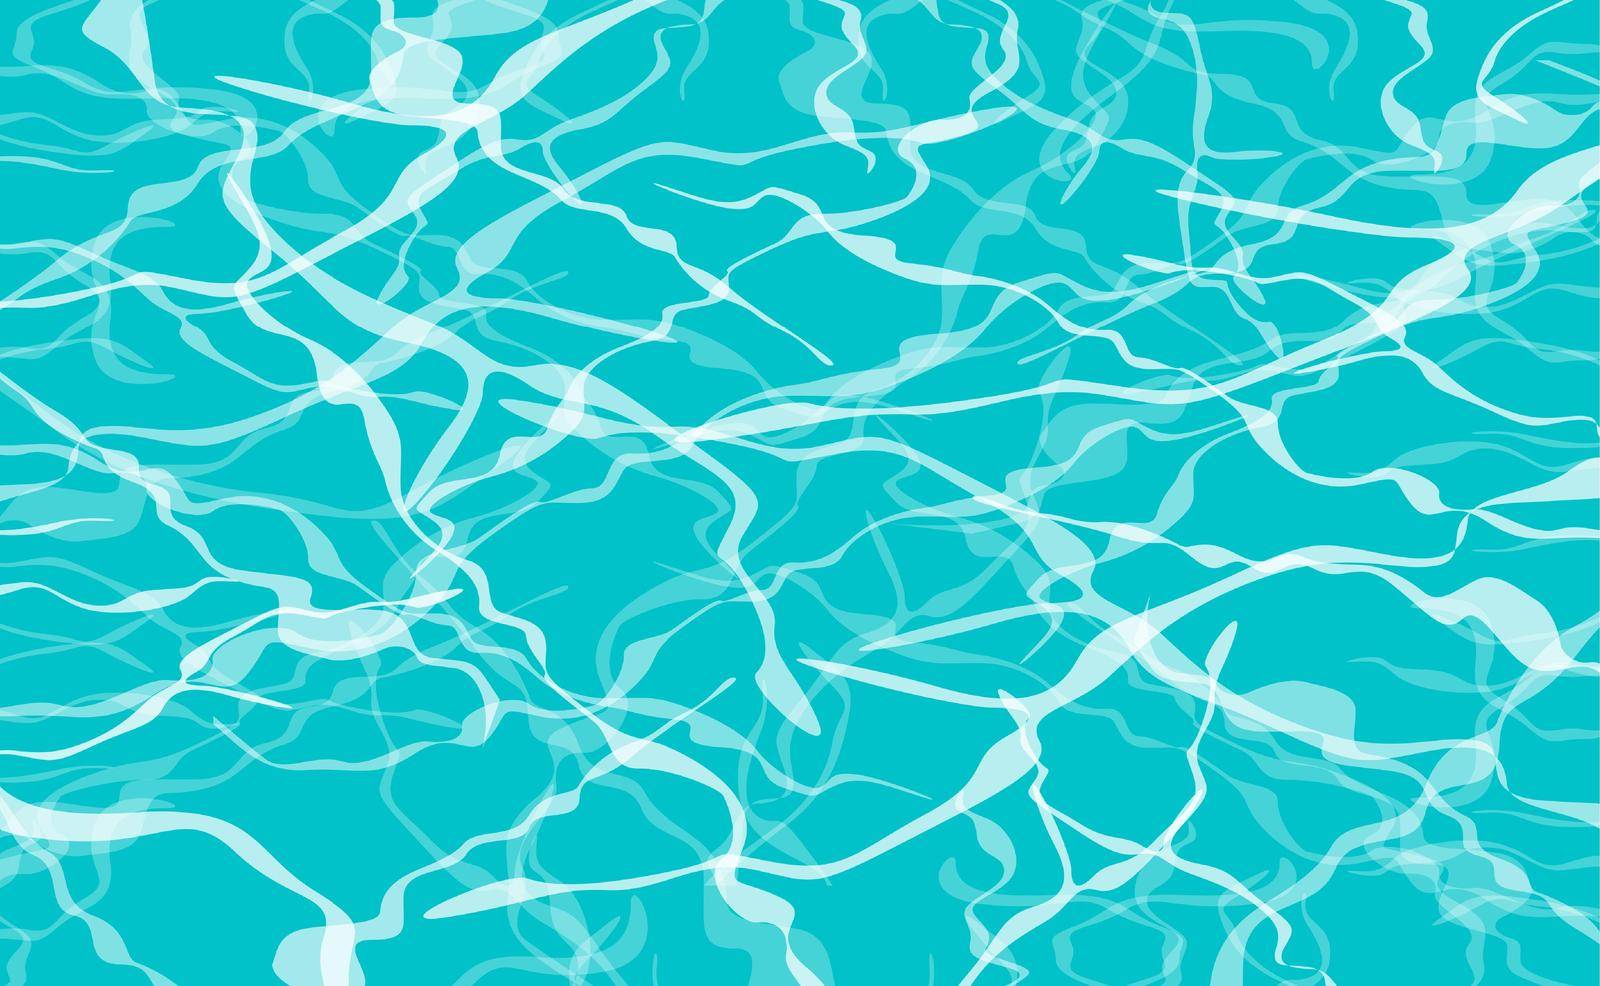 Reflection of Sun in Water. Pure Blue Transparent Water With Patches Of Light From The Sun In Pool. Easily Editable Vector. EPS 10.